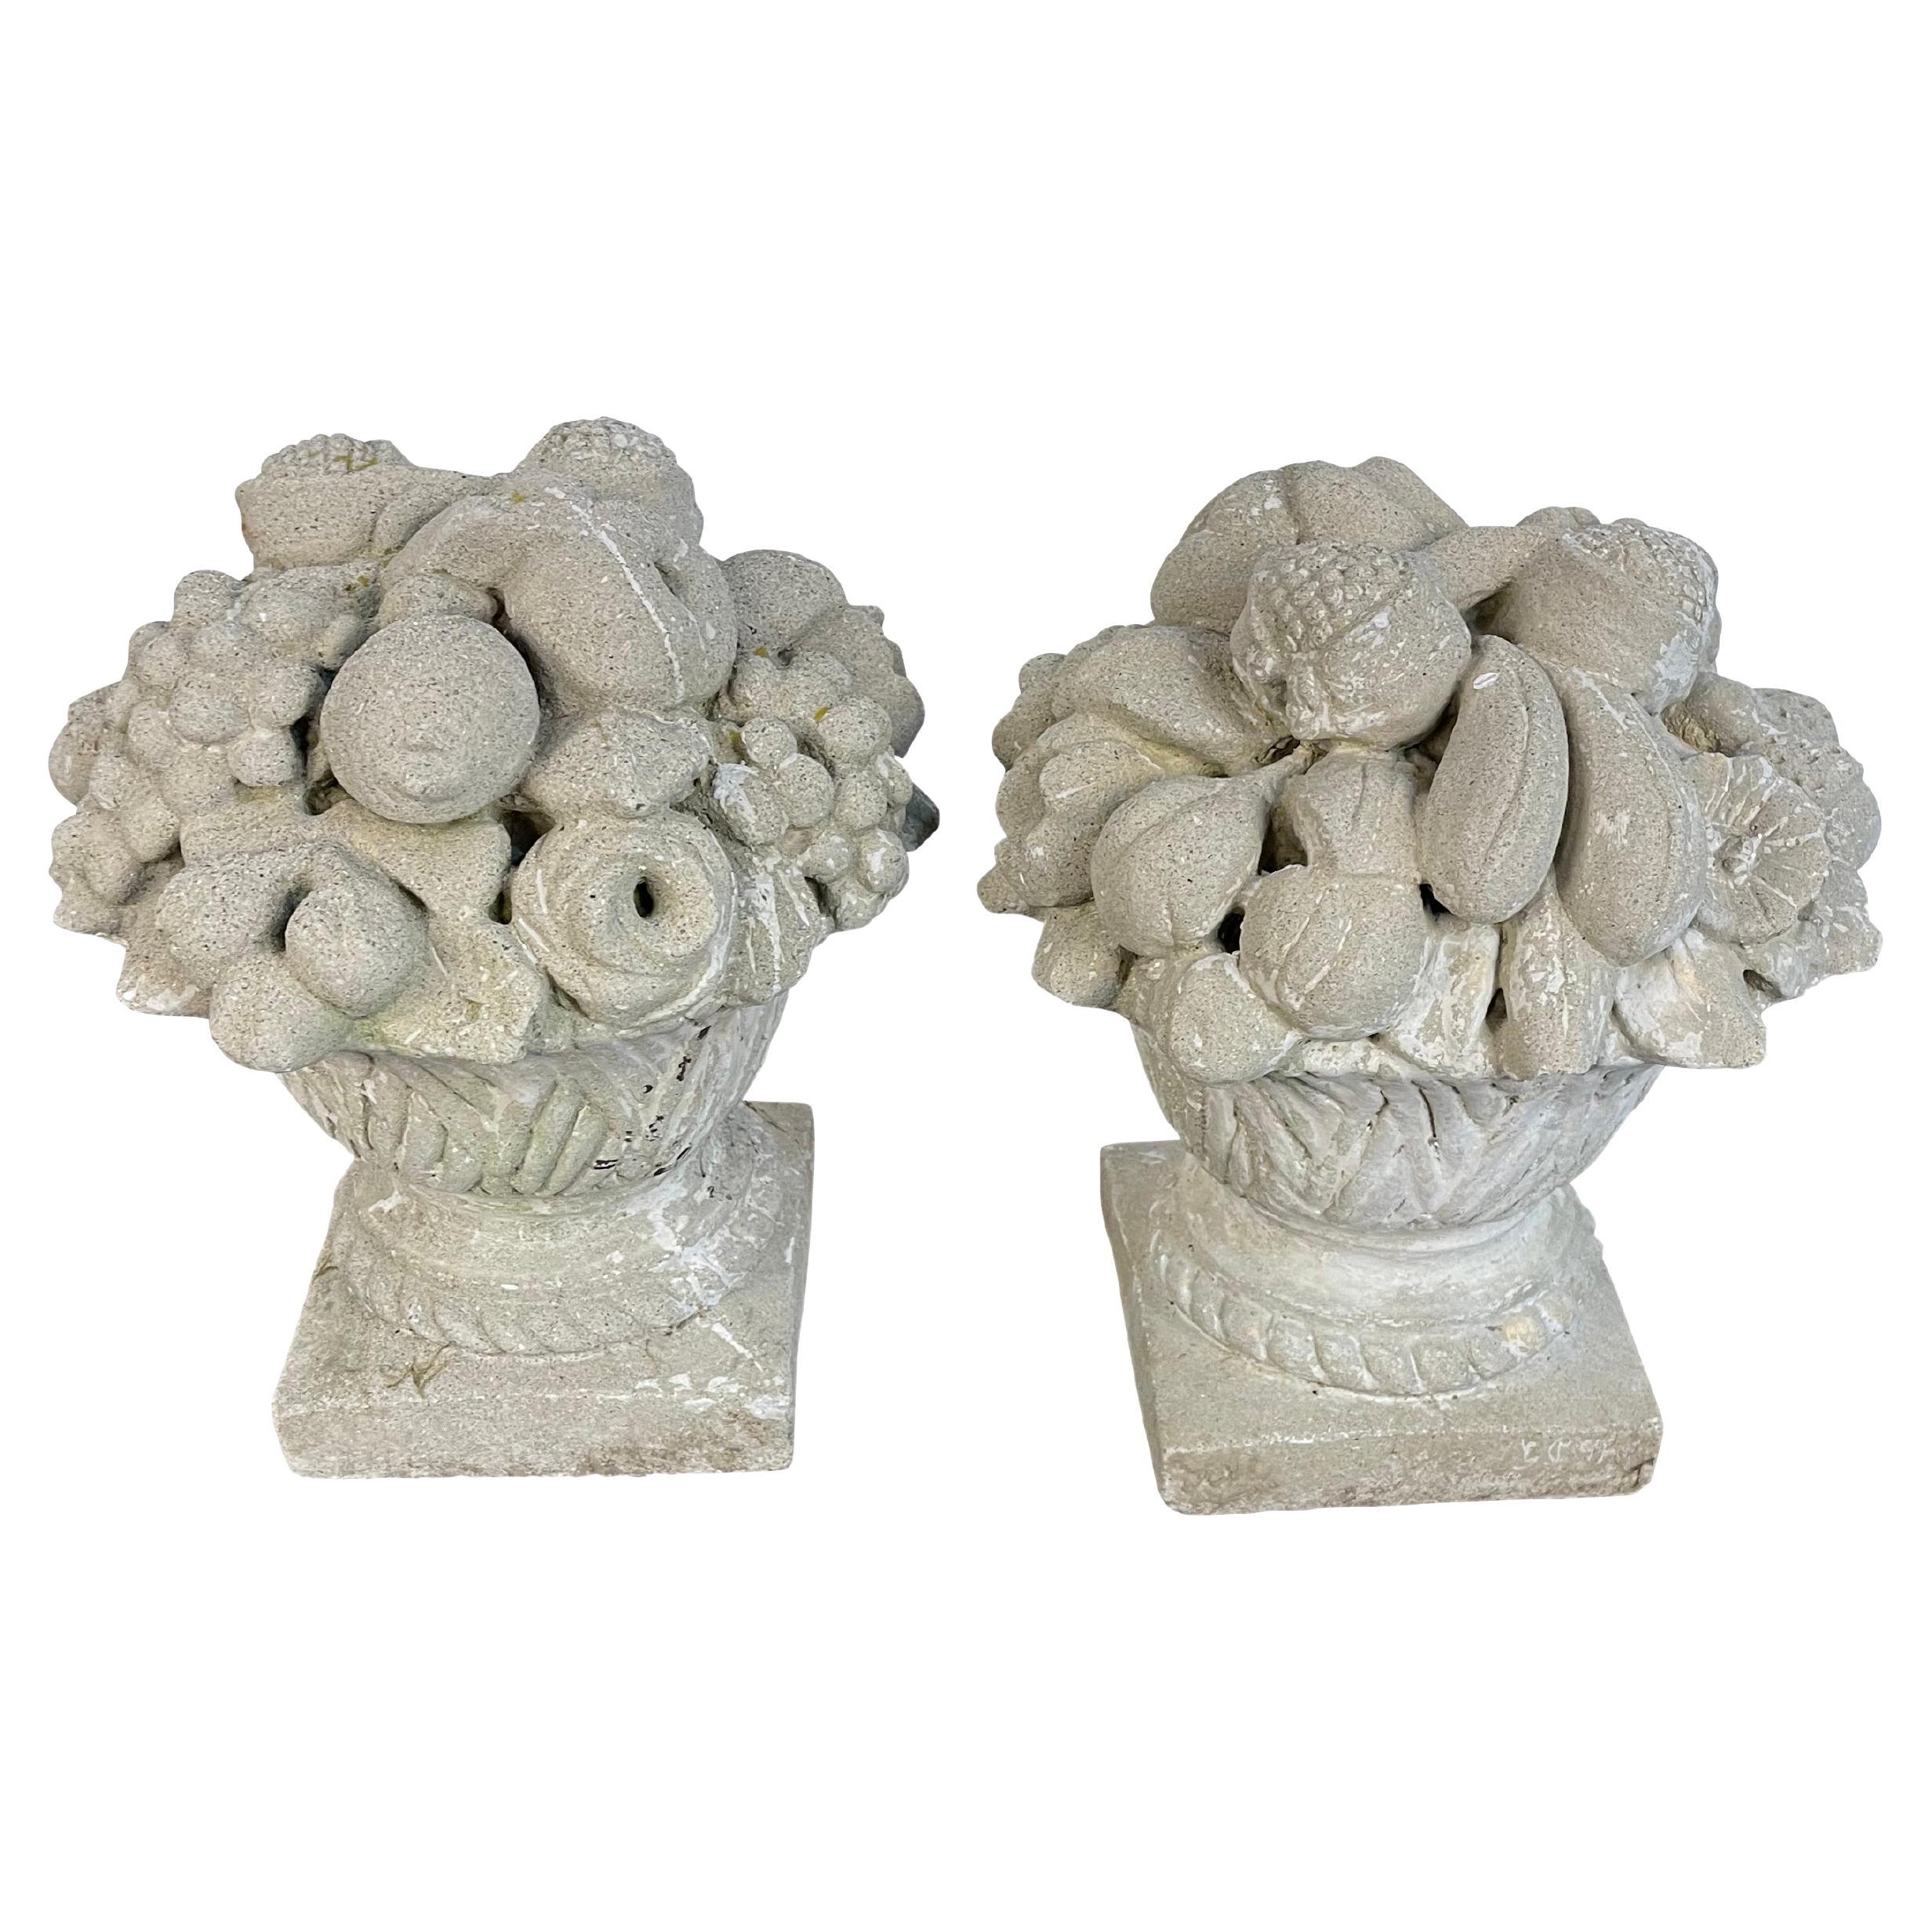 Vintage pair of cast stone fruit baskets in a nice size for indoor use or outdoors. Very good condition.  Well cast with lots of detail. 